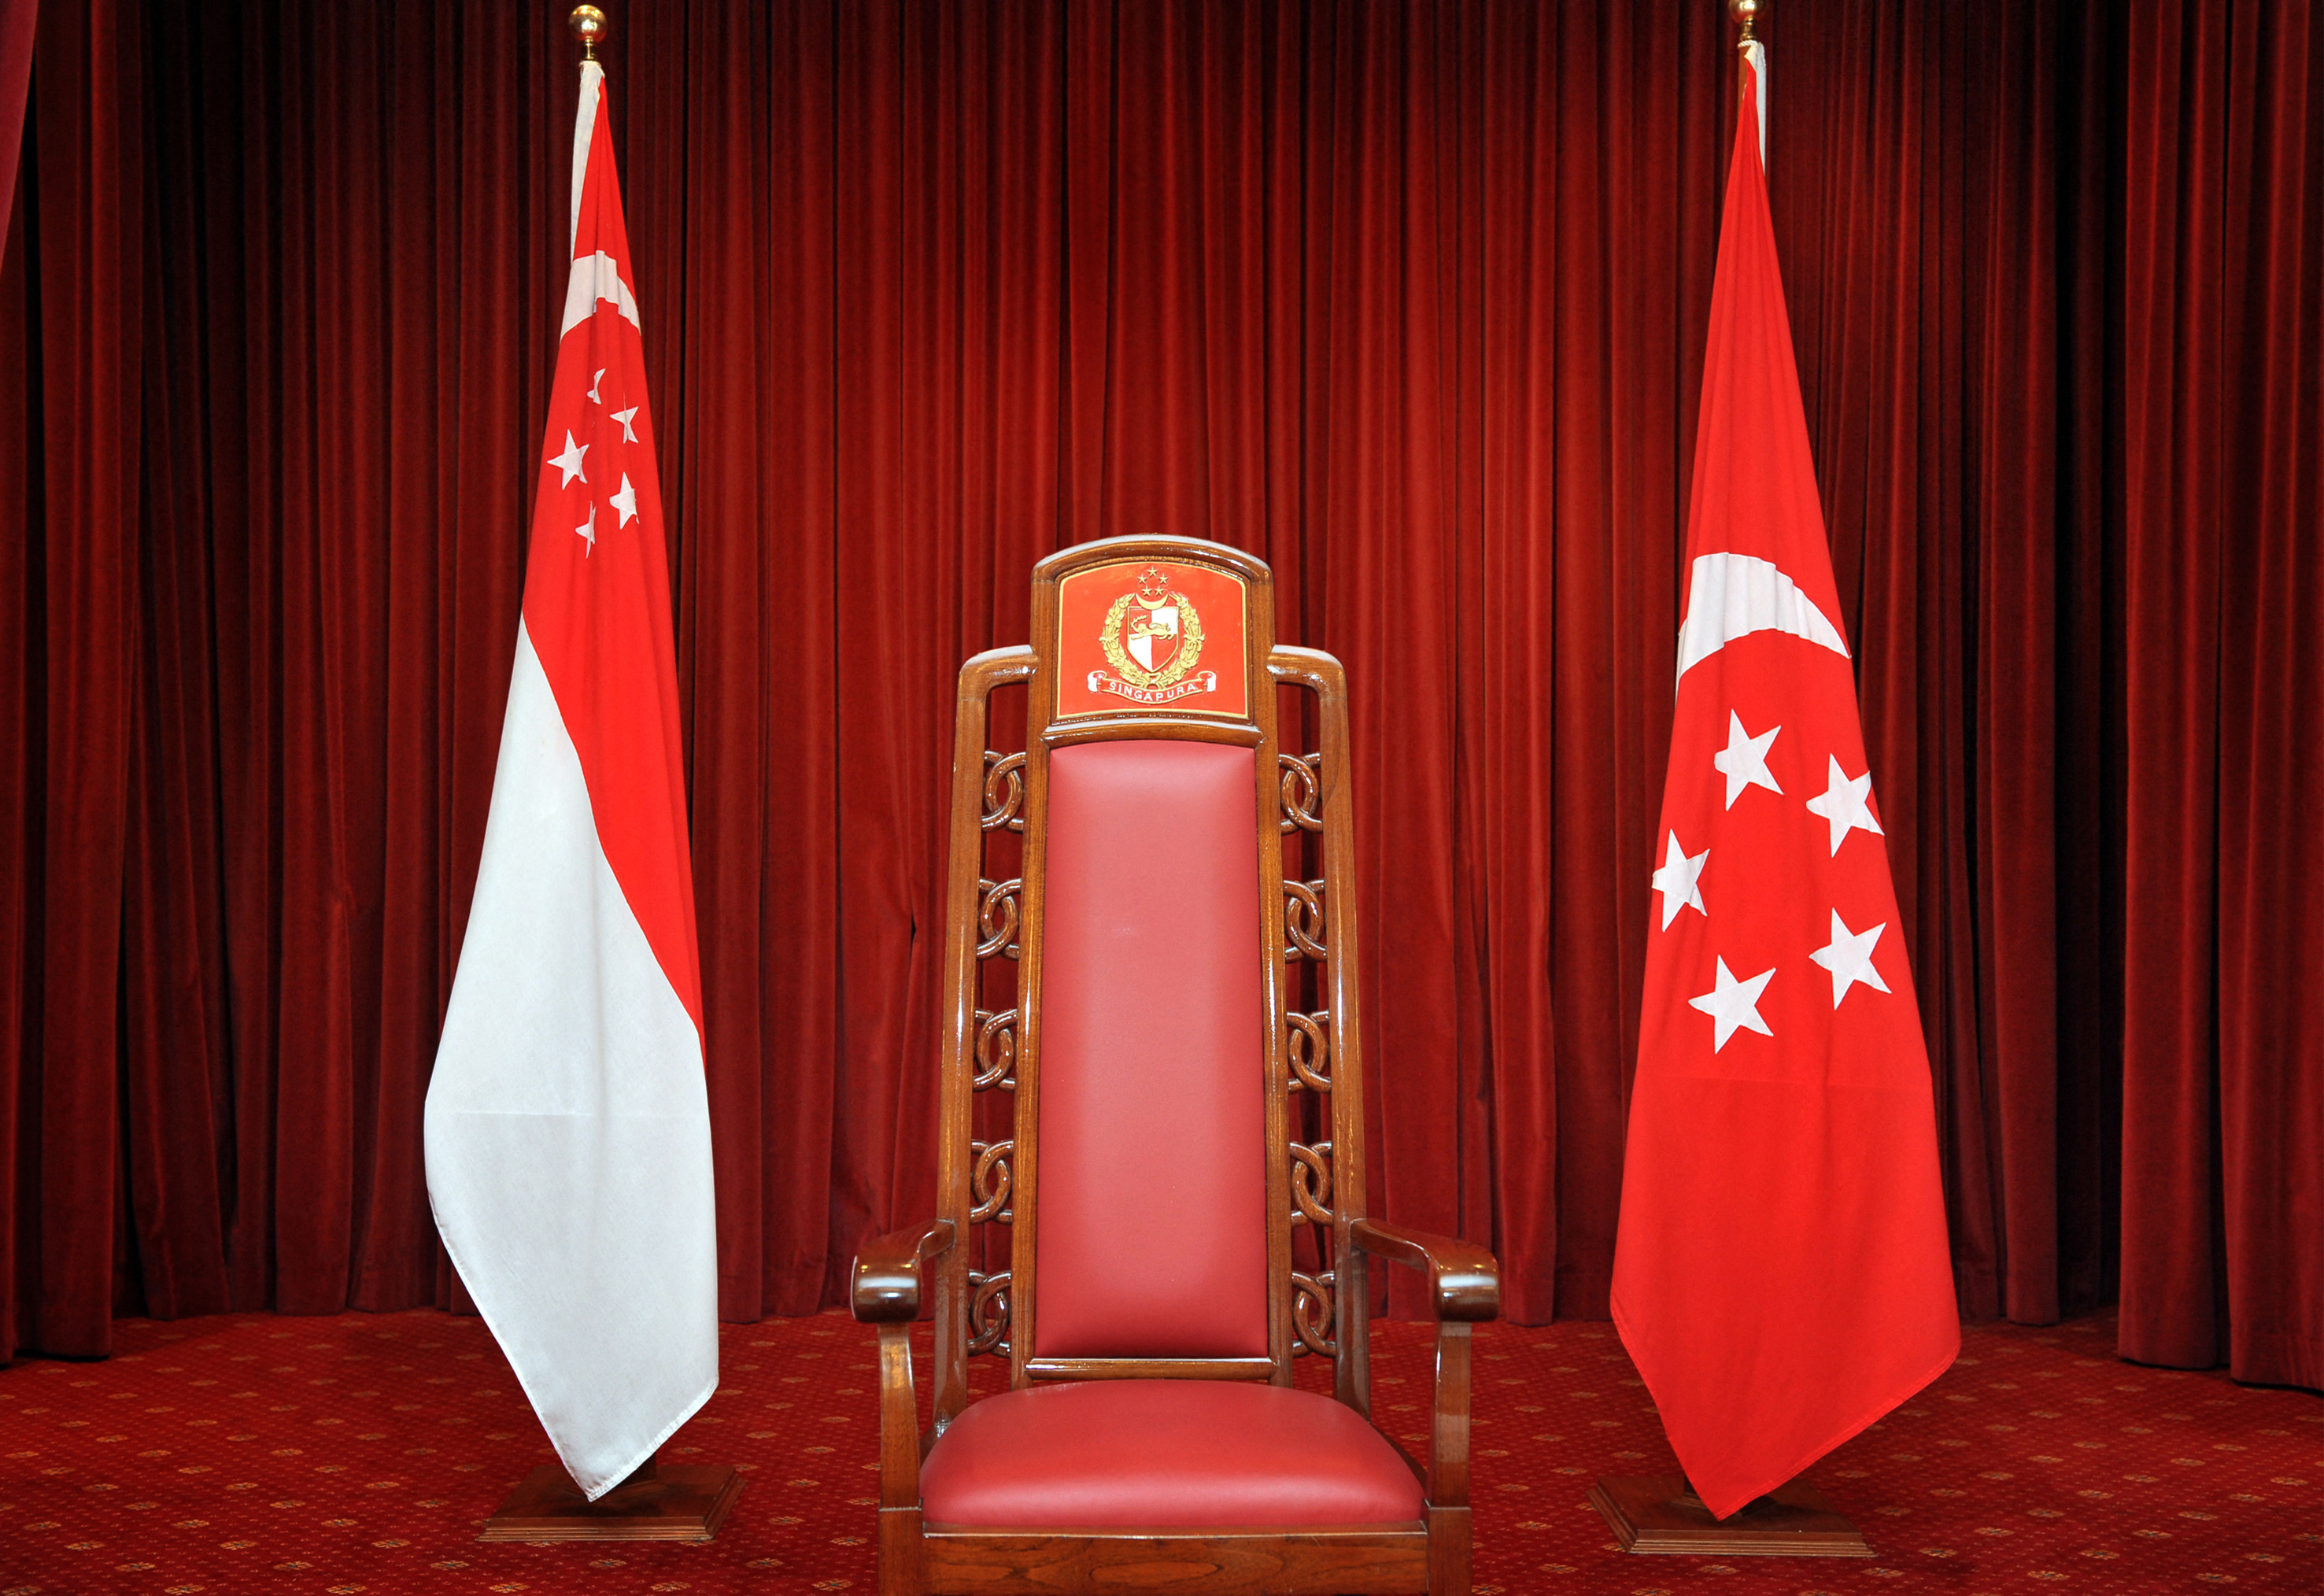 The Presidential chair, flanked by the Singapore flag (left) and the Presidential Standard (right) at the Istana. Photo: SPH Media via AFP